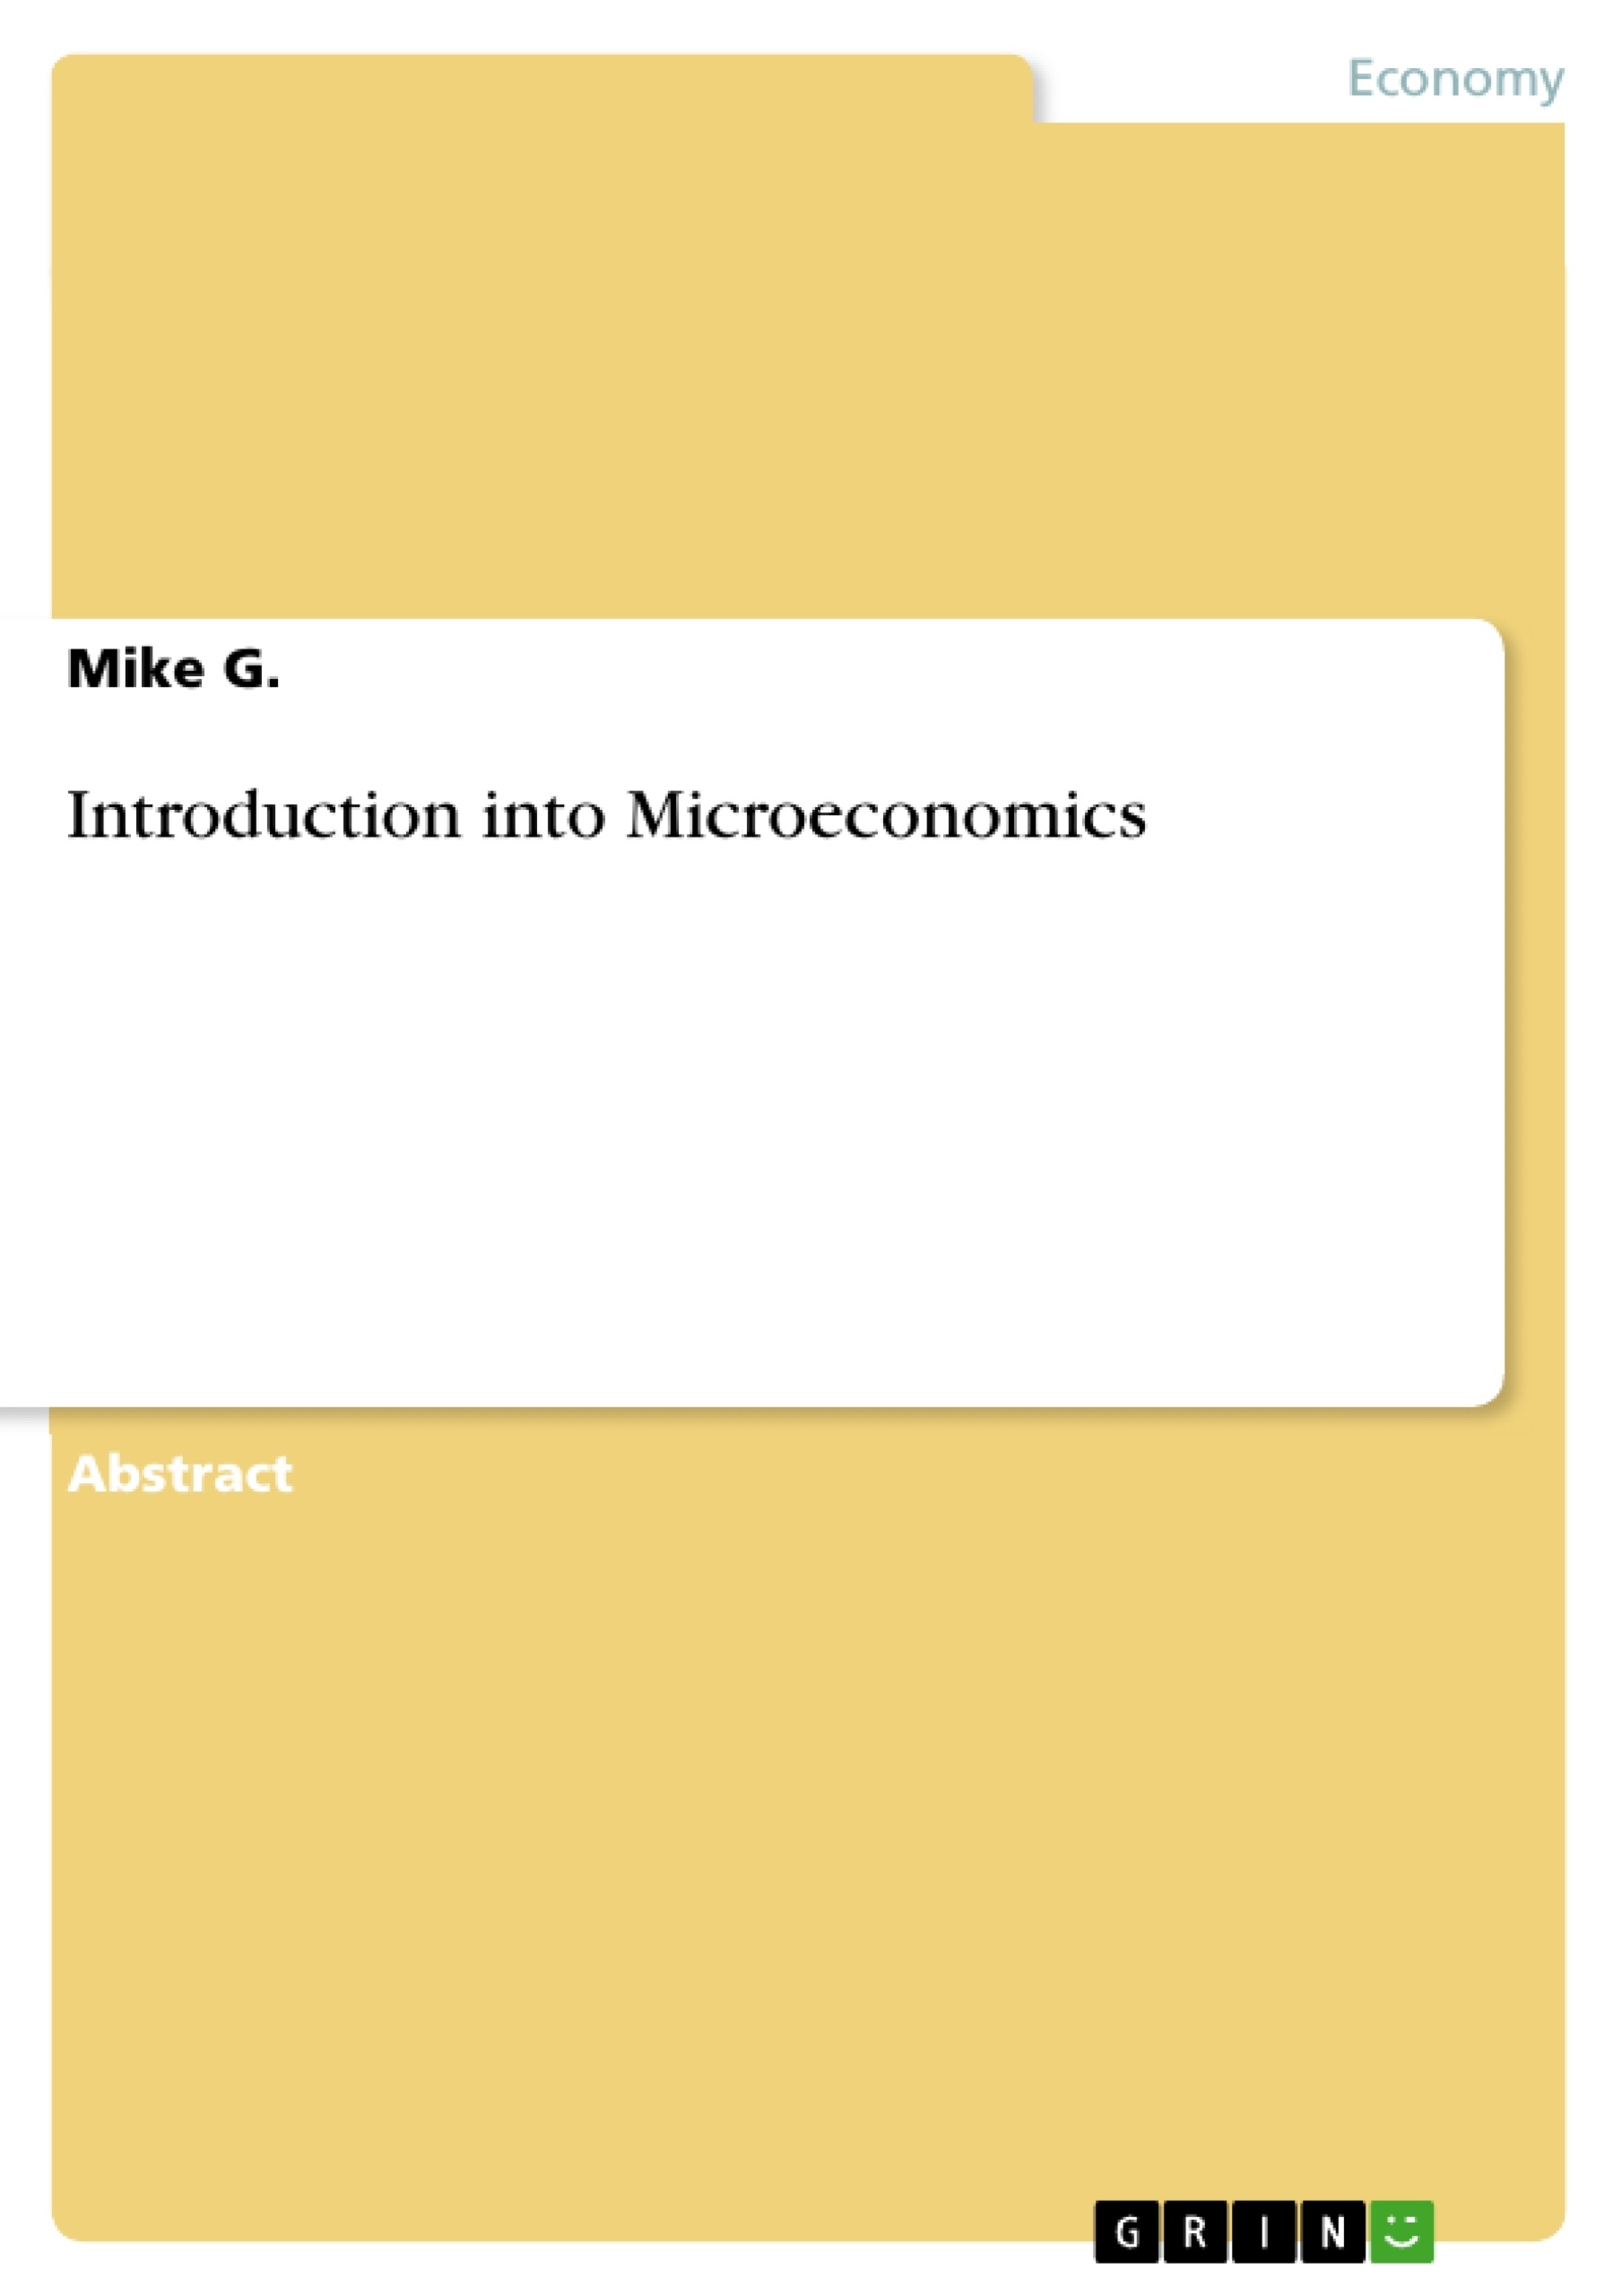 Title: Introduction into Microeconomics